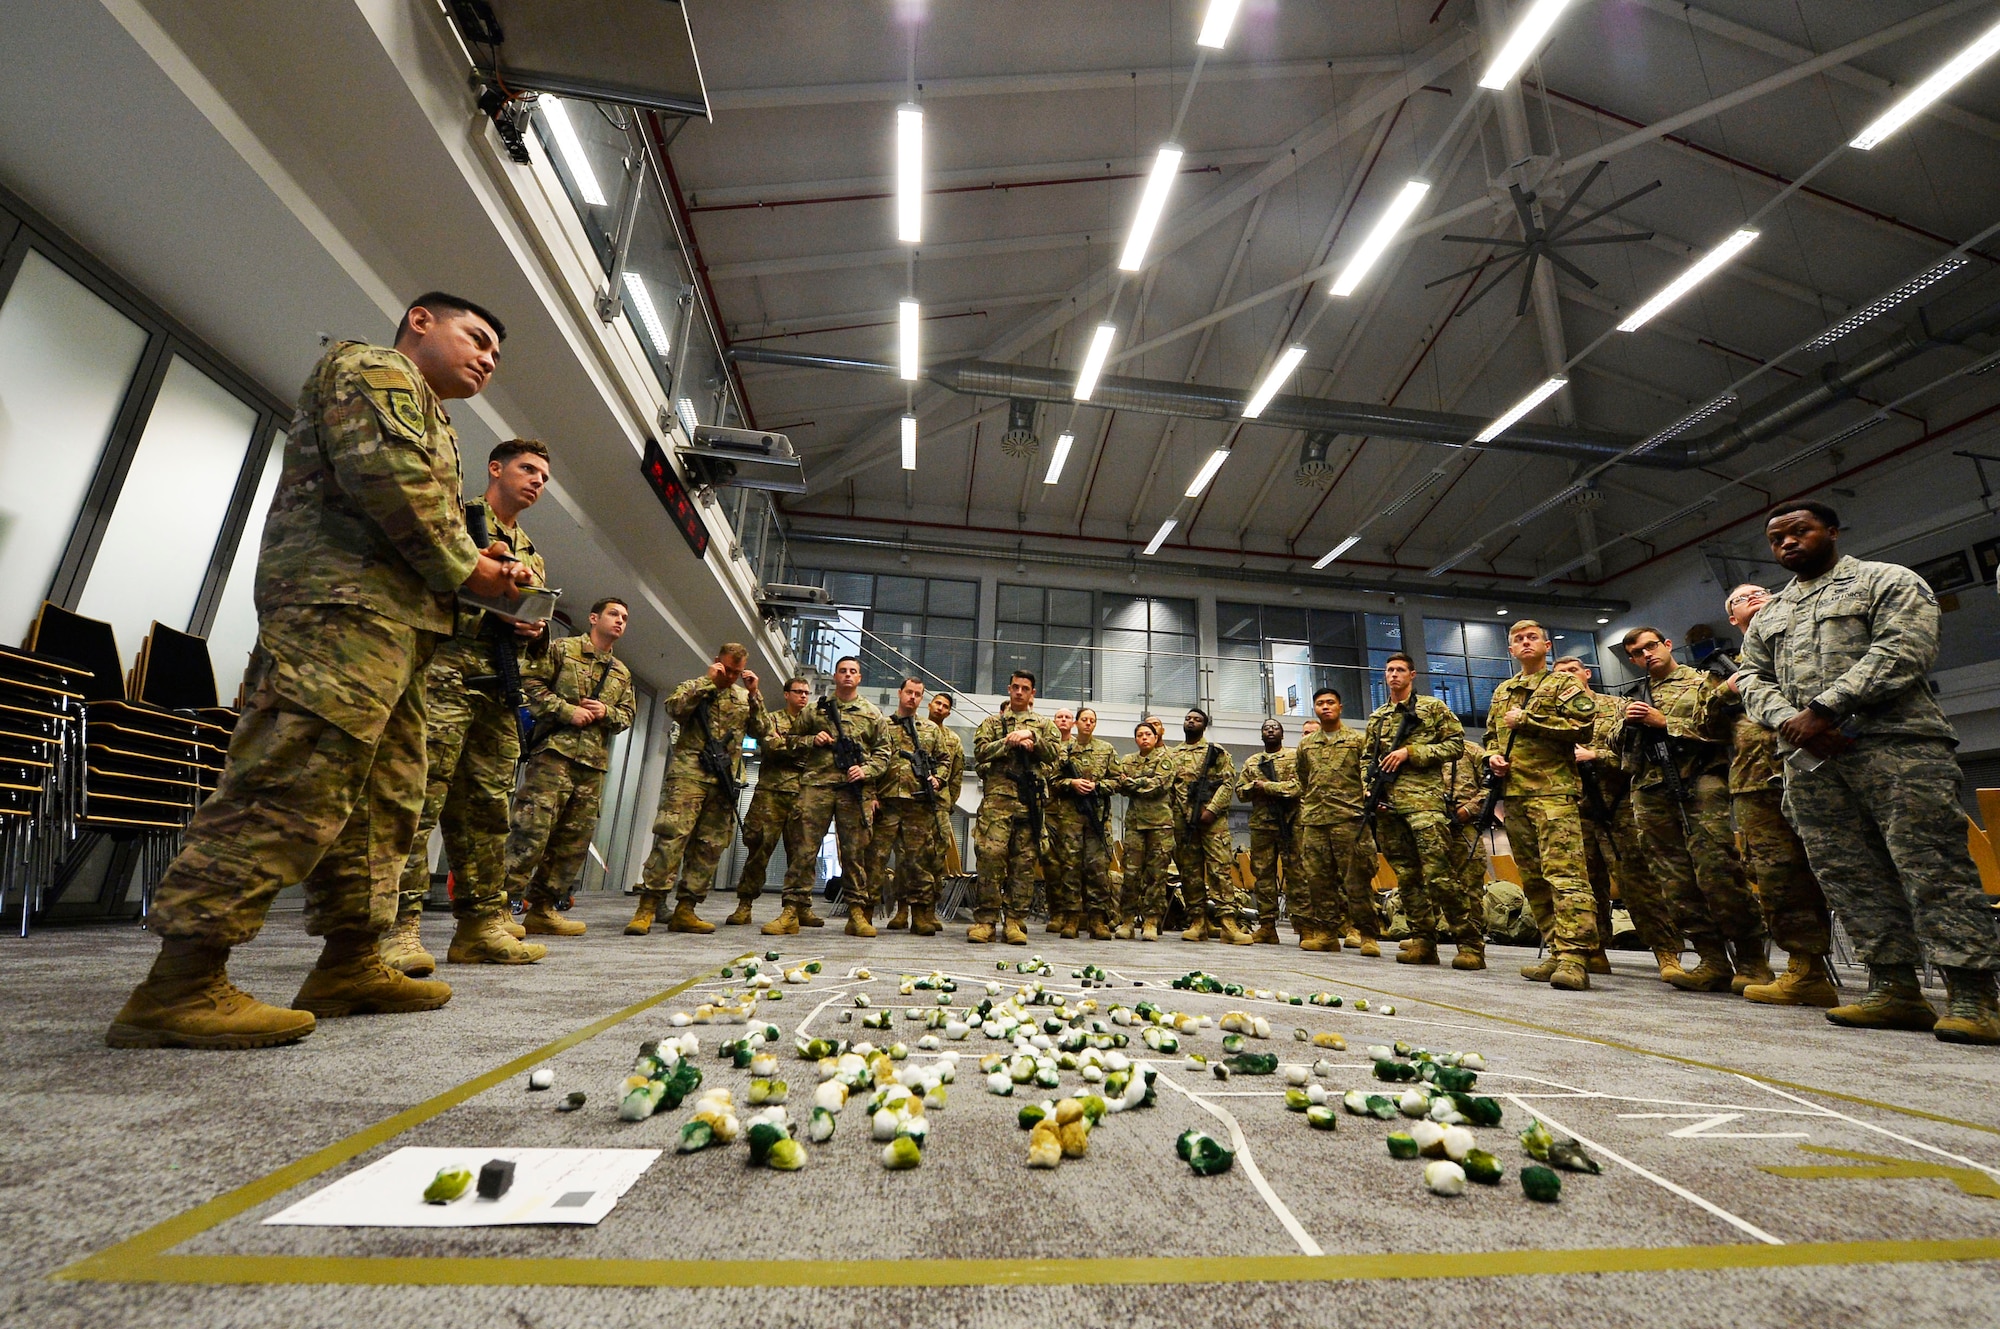 U.S. Airmen assigned to the 435th Contingency Response Group listen to a mission brief for Exercise Saber Junction on Ramstein Air Base, Germany, Sept. 25, 2018. Some Airmen are expected to support Saber Junction in Hohenfels, Germany, while the rest will conduct auxiliary training on Ramstein. (U.S. Air Force photo by Senior Airman Joshua Magbanua)